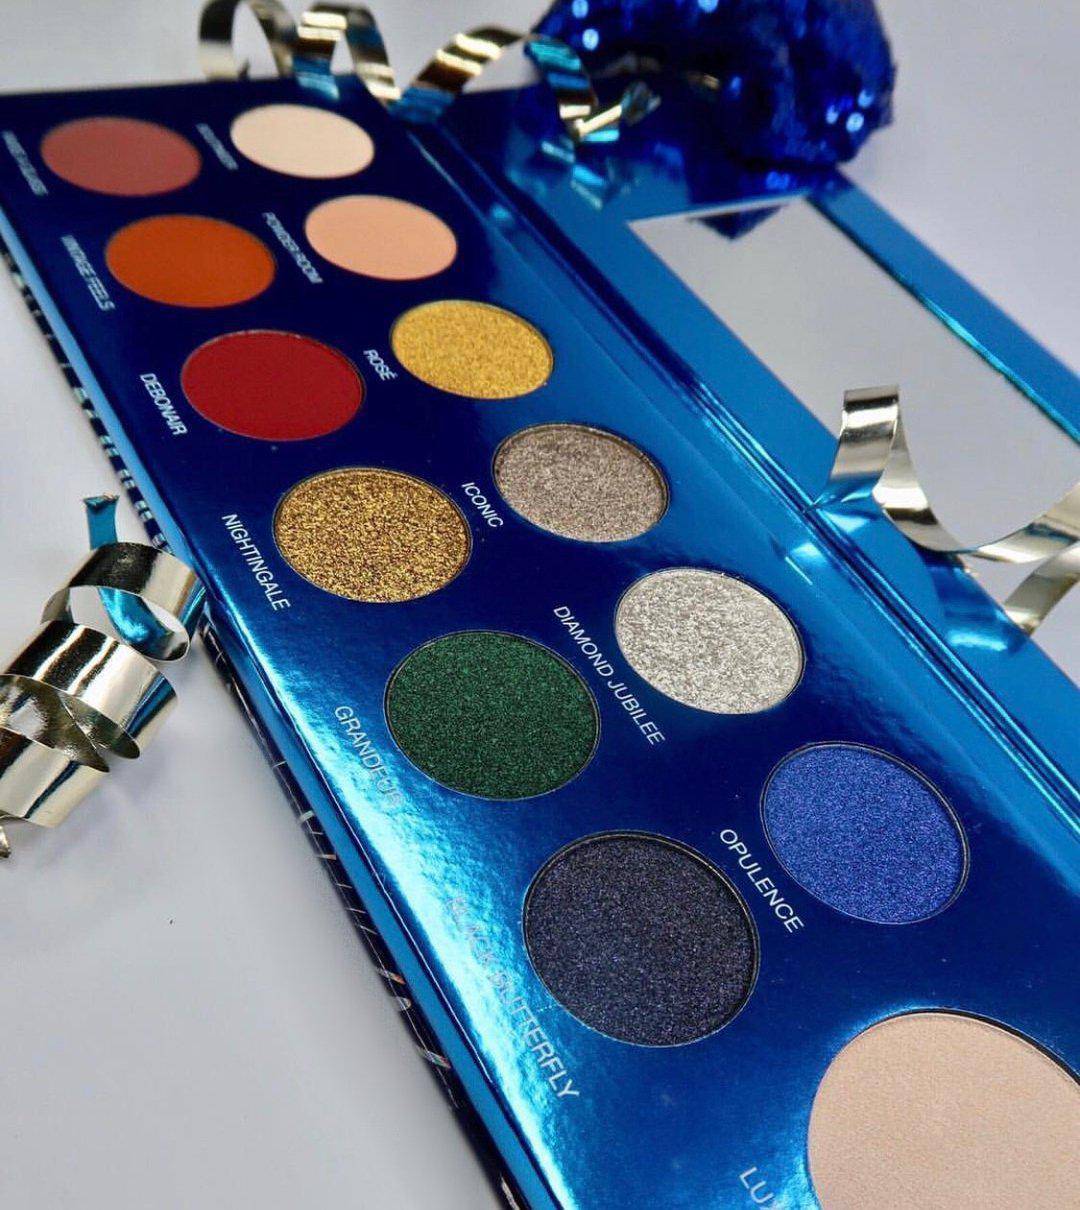 Cheers To The Beauty™ up close -  eyeshadow and highlighter palette by Coloured Raine Cosmetics